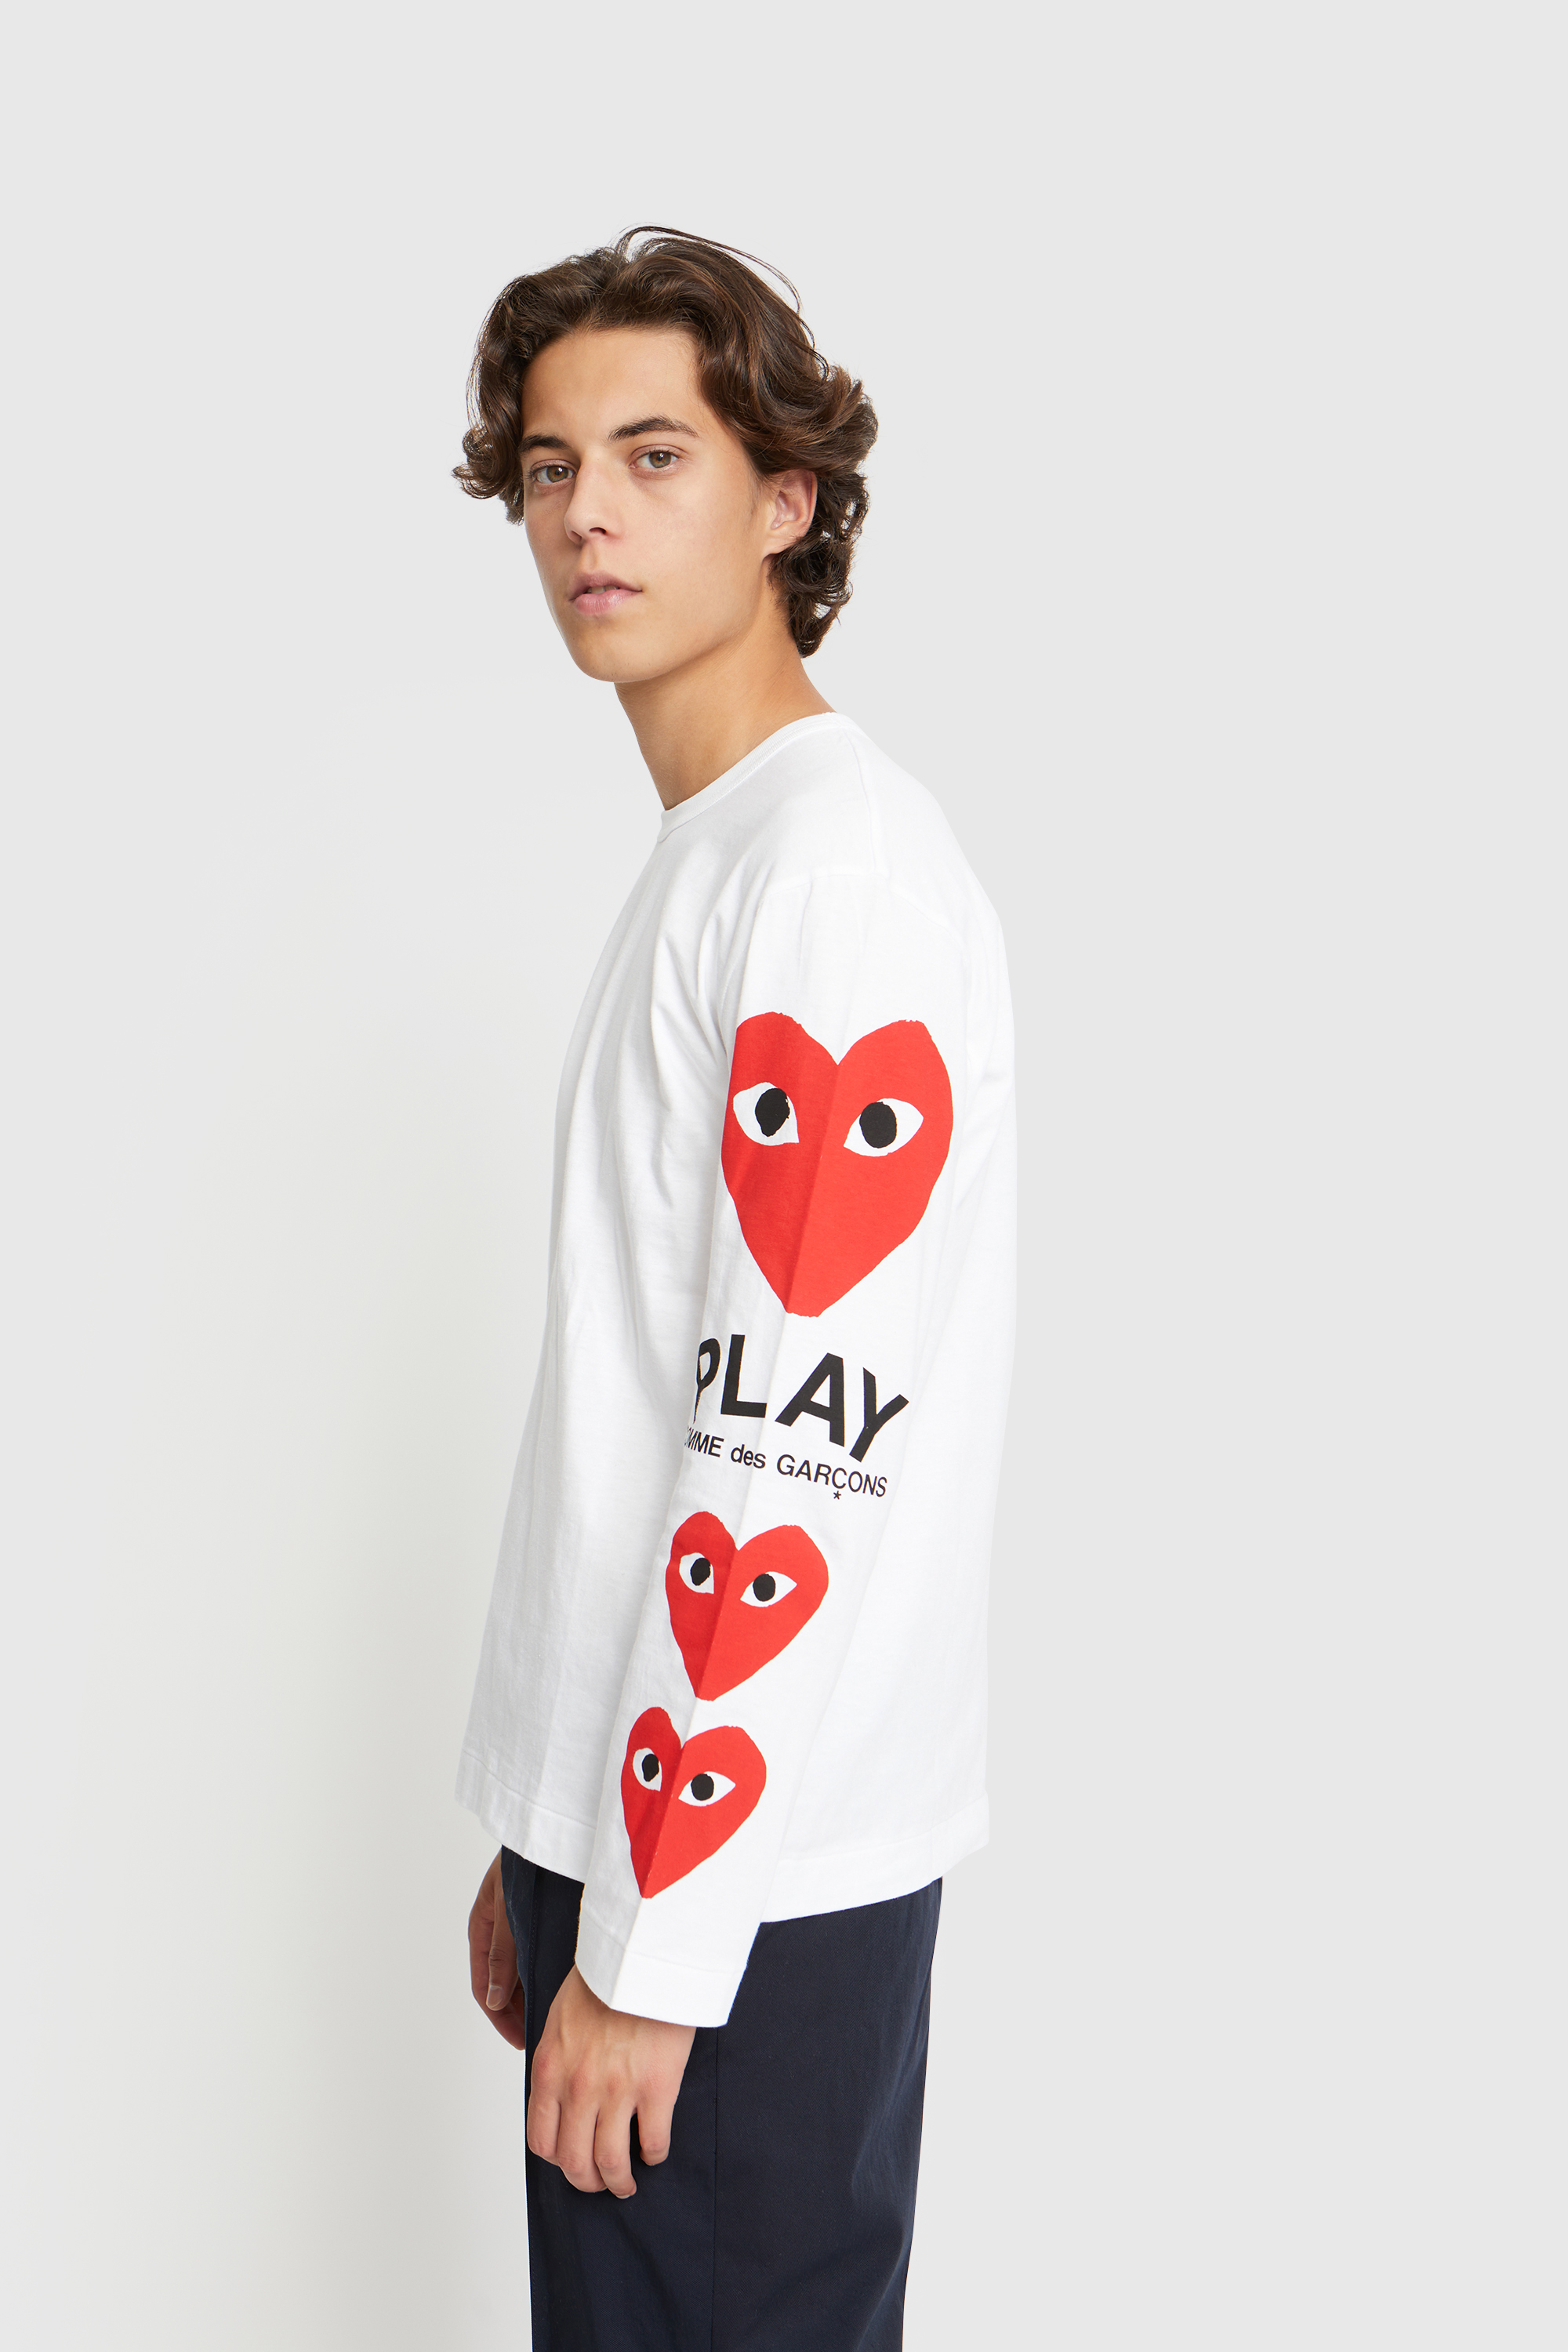 Comme PLAY Men Play Logo T-shirt White (1) WoodWood.com